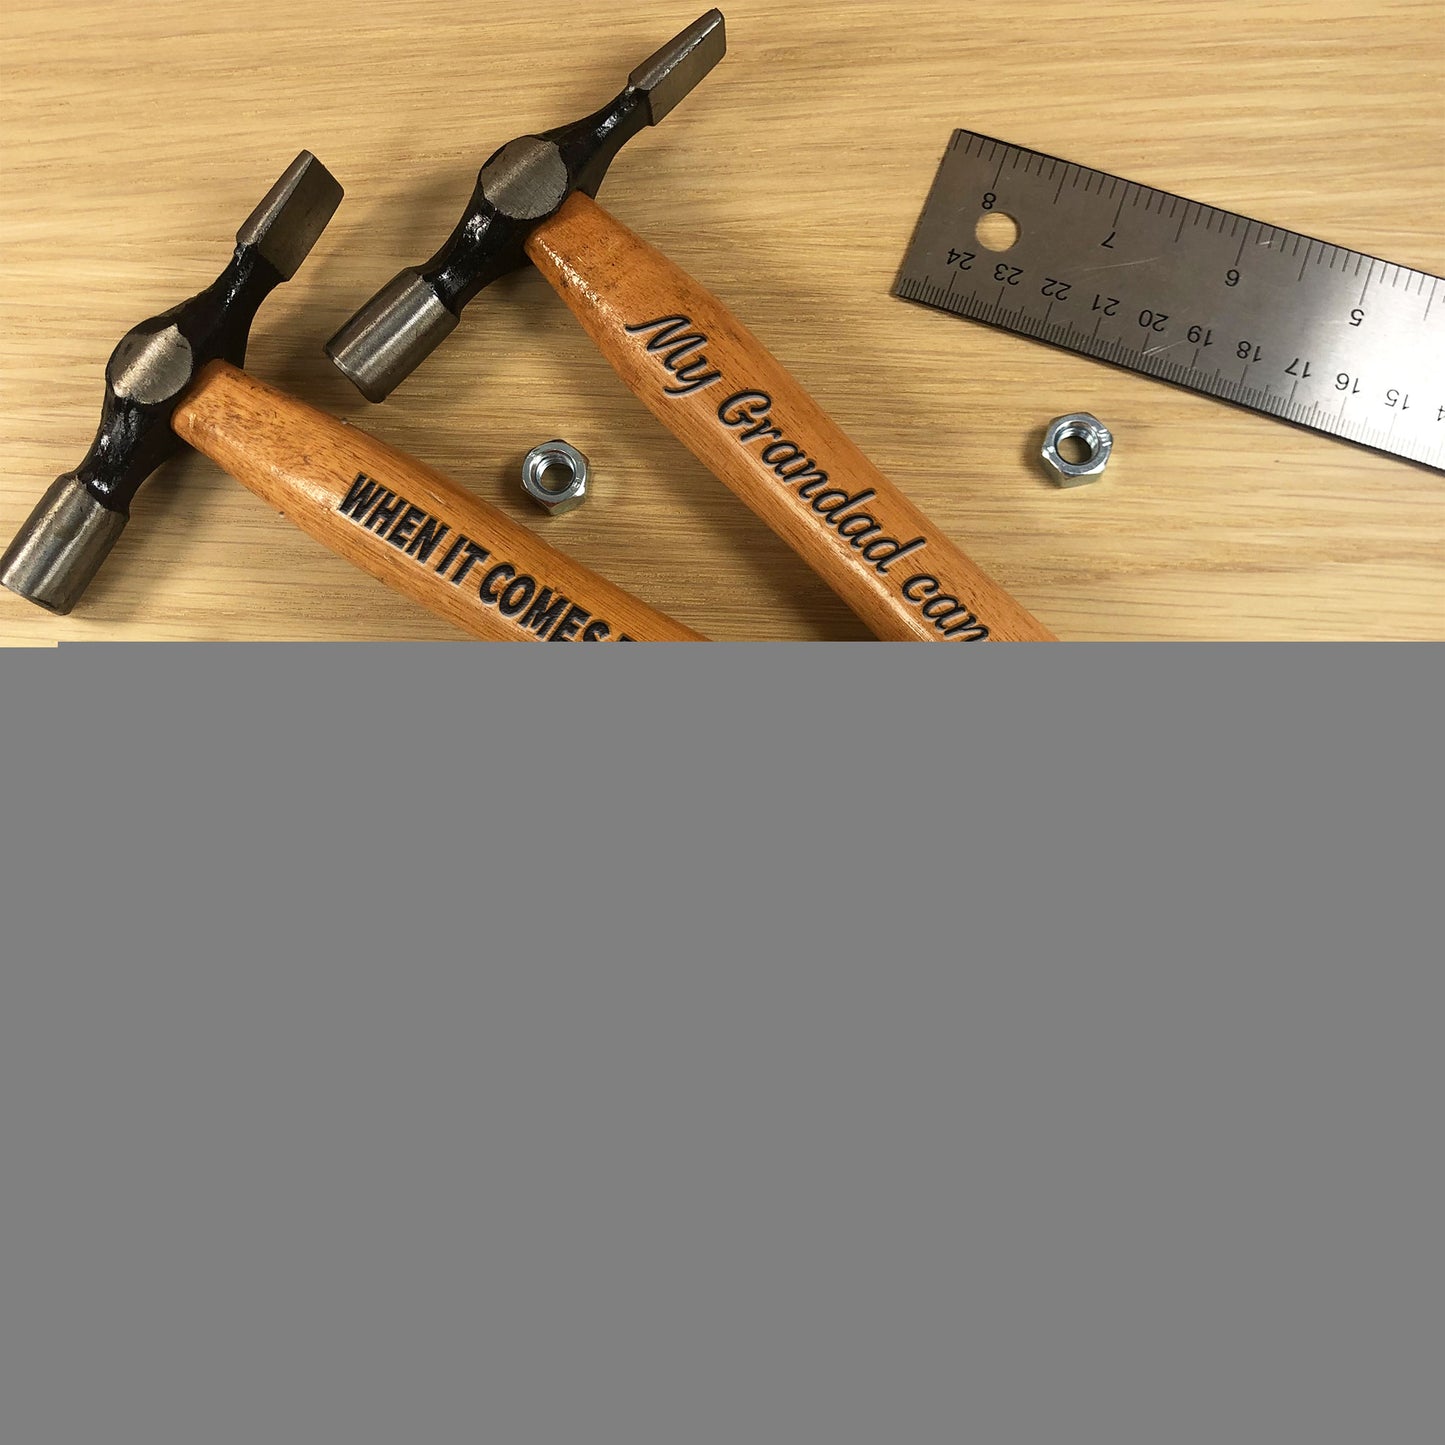 Best Grandad Engraved Hammer Gift Birthday Fathers Day Gifts